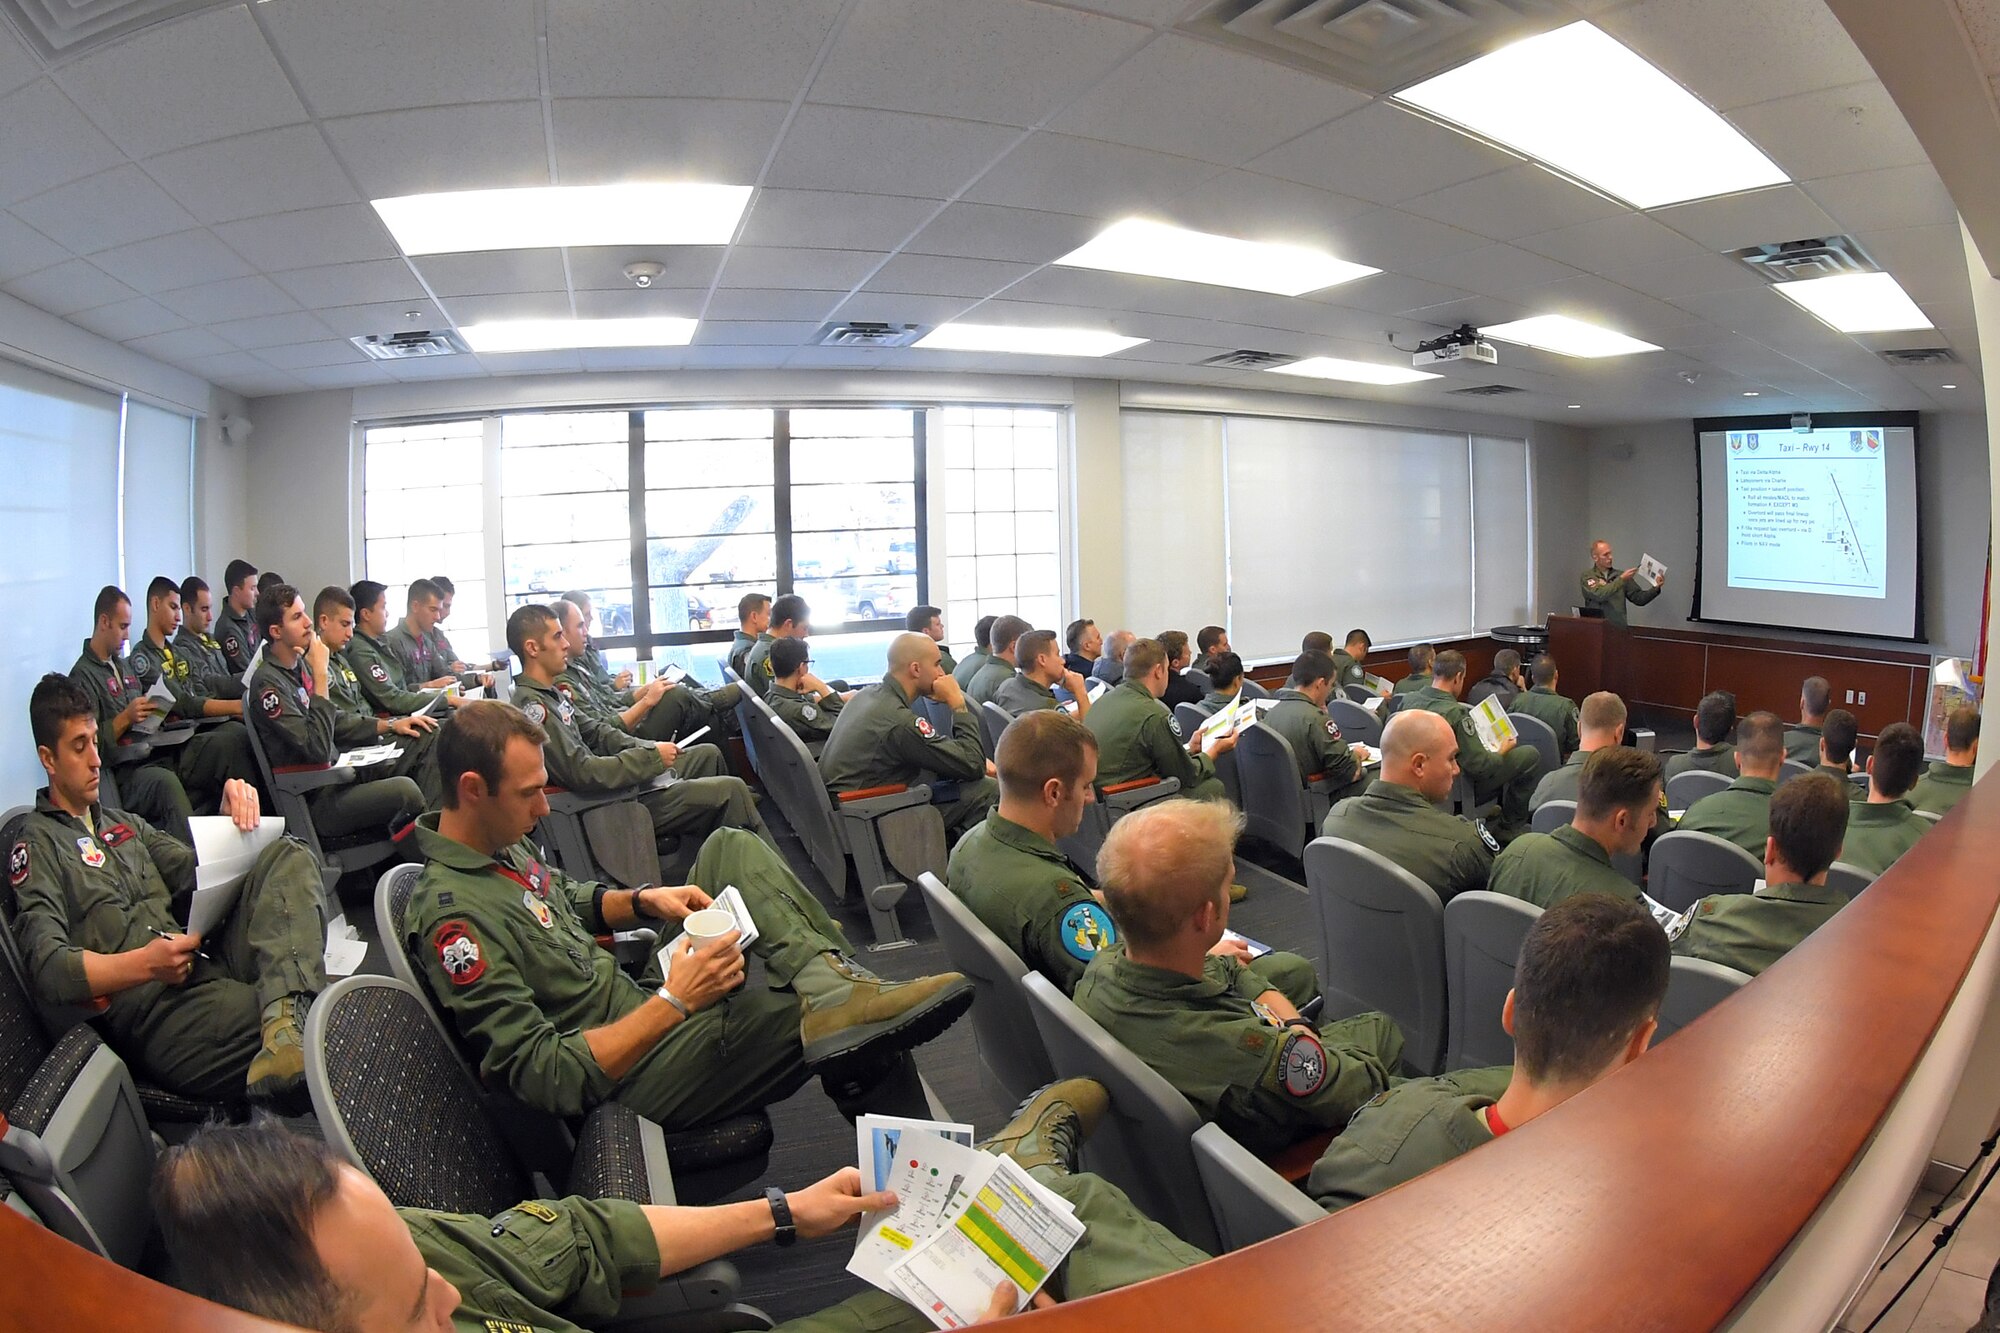 F-35A pilots from the 388th and 419th Fighter Wing go through their mission brief as they prepare for a combat power exercise at Hill Air Force Base, Utah. The exercise aims to confirm their ability to quickly employ a large force of jets against air and ground targets, and demonstrate the readiness and lethality of the F-35 Lightning II. As the first combat-ready F-35 units in the Air Force, the 388th and 419th FWs are ready to deploy anywhere in the world at a moment’s notice. (United States Air Force photo/Todd Cromar)